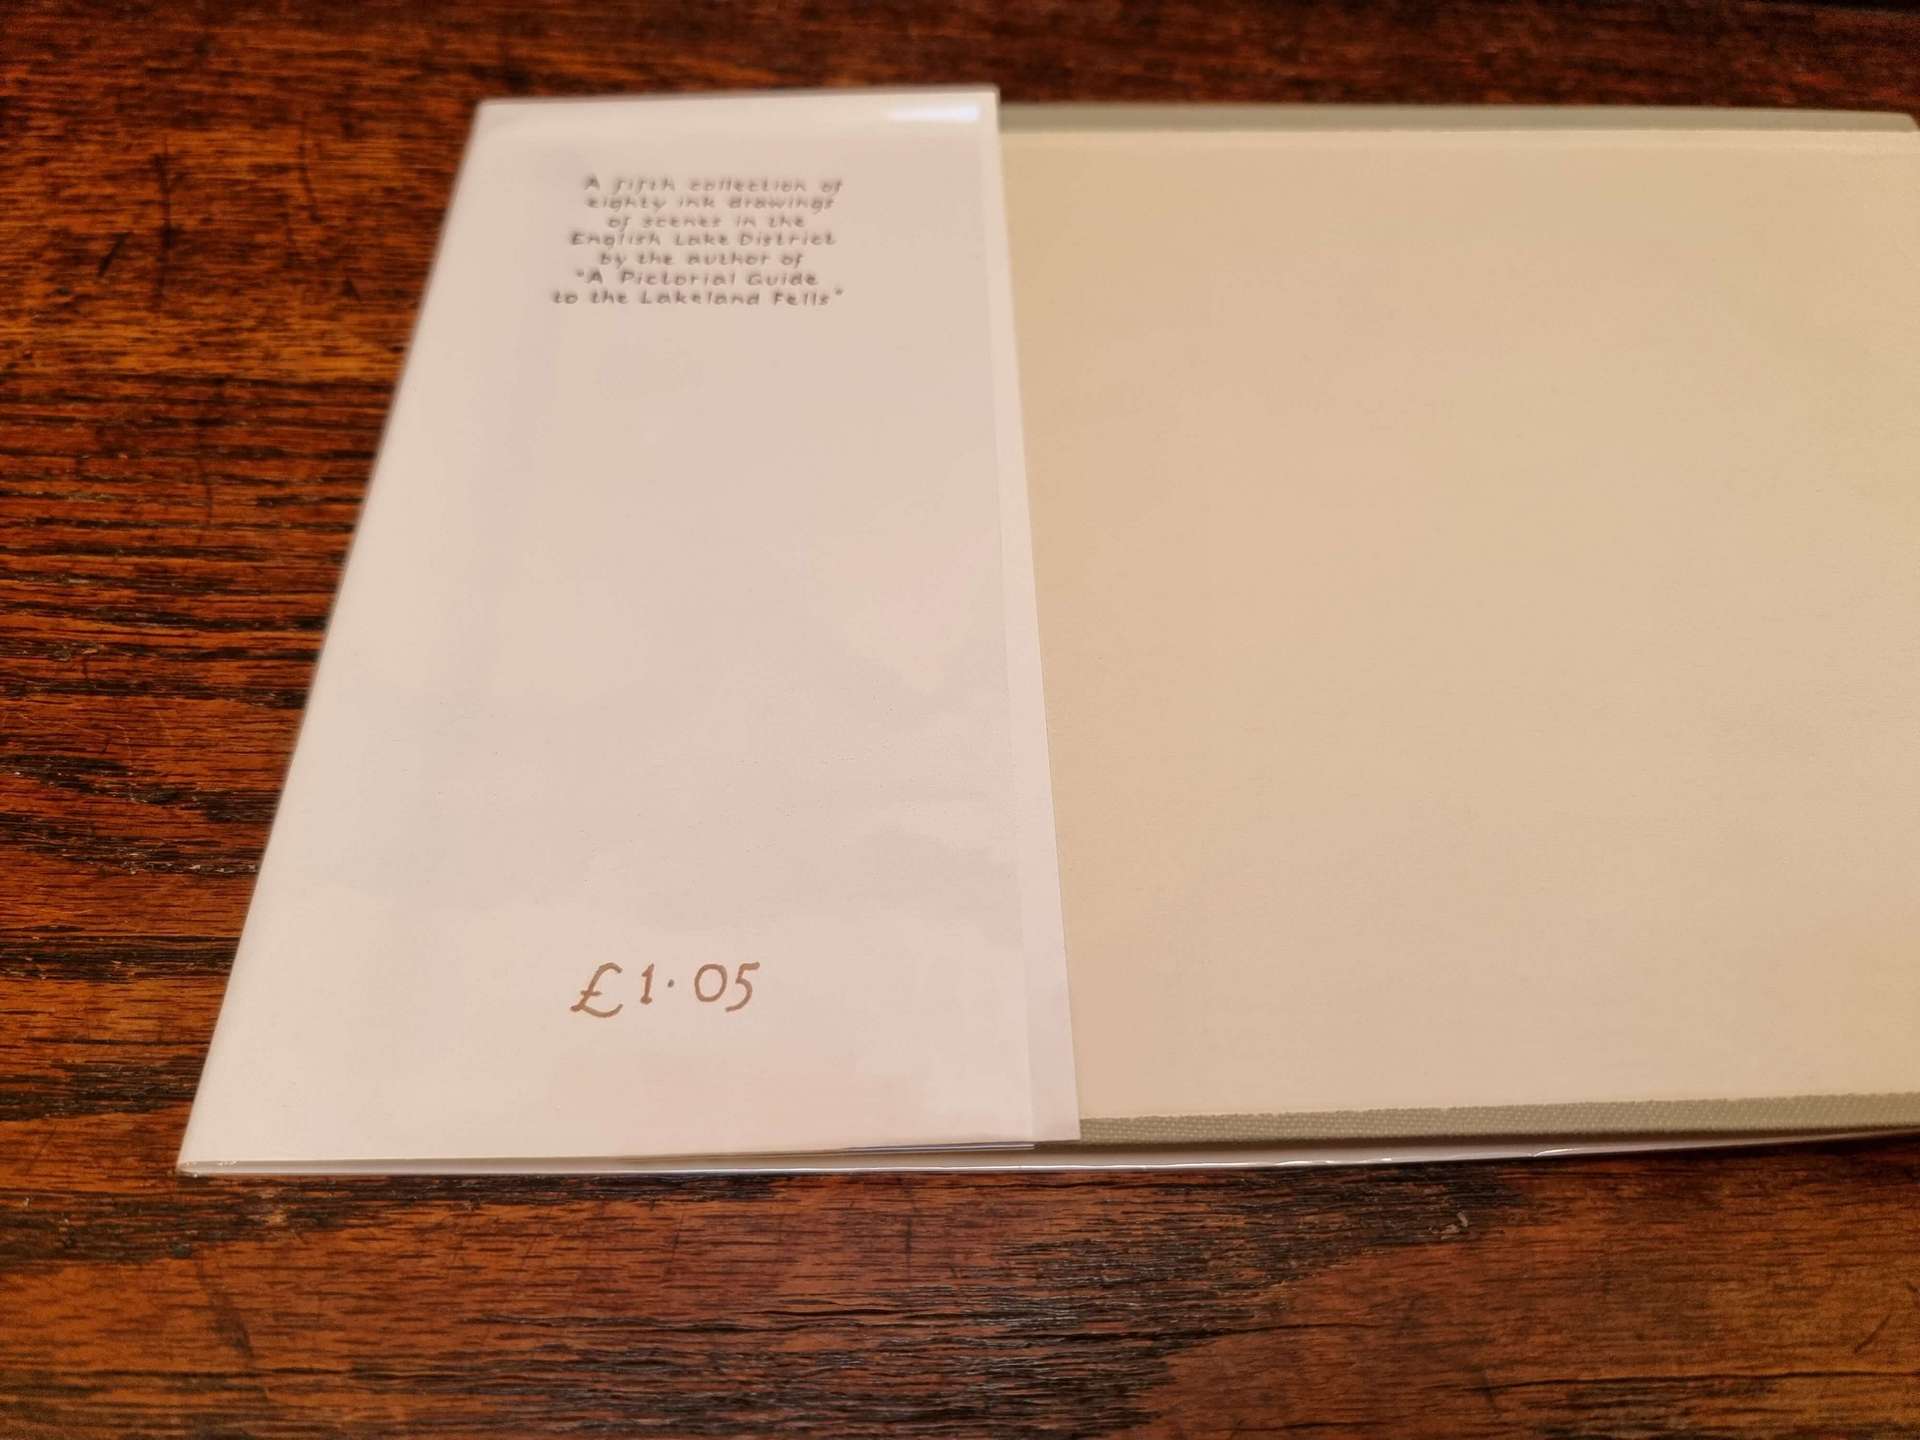 A Fifth Lakeland Sketchbook First Edition £1.05